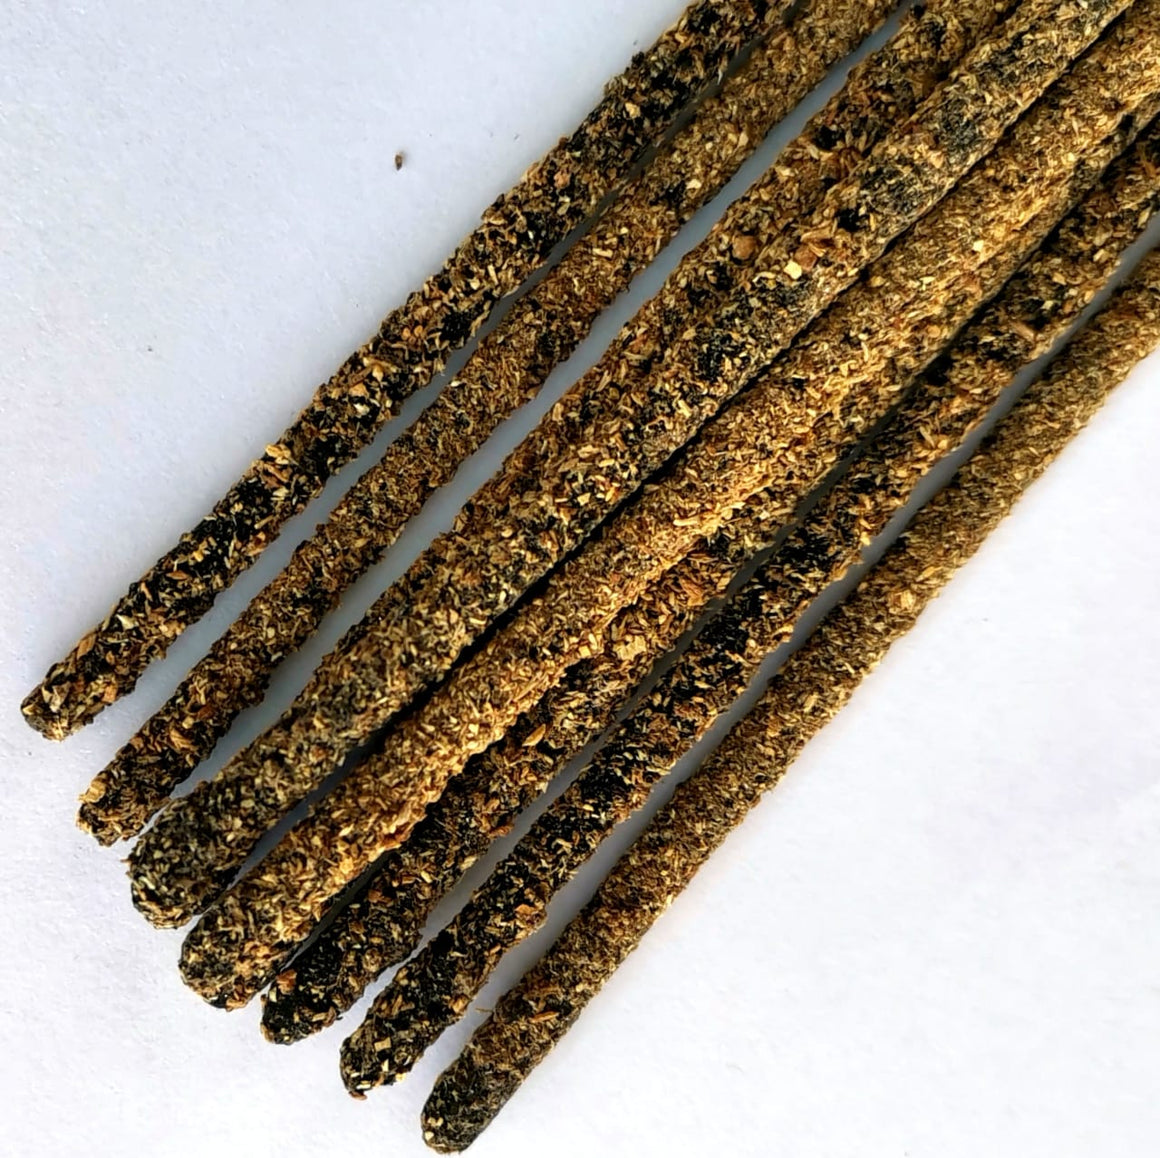 20 Palo Santo Incense Sticks Handrolled In Mexico Long Duration